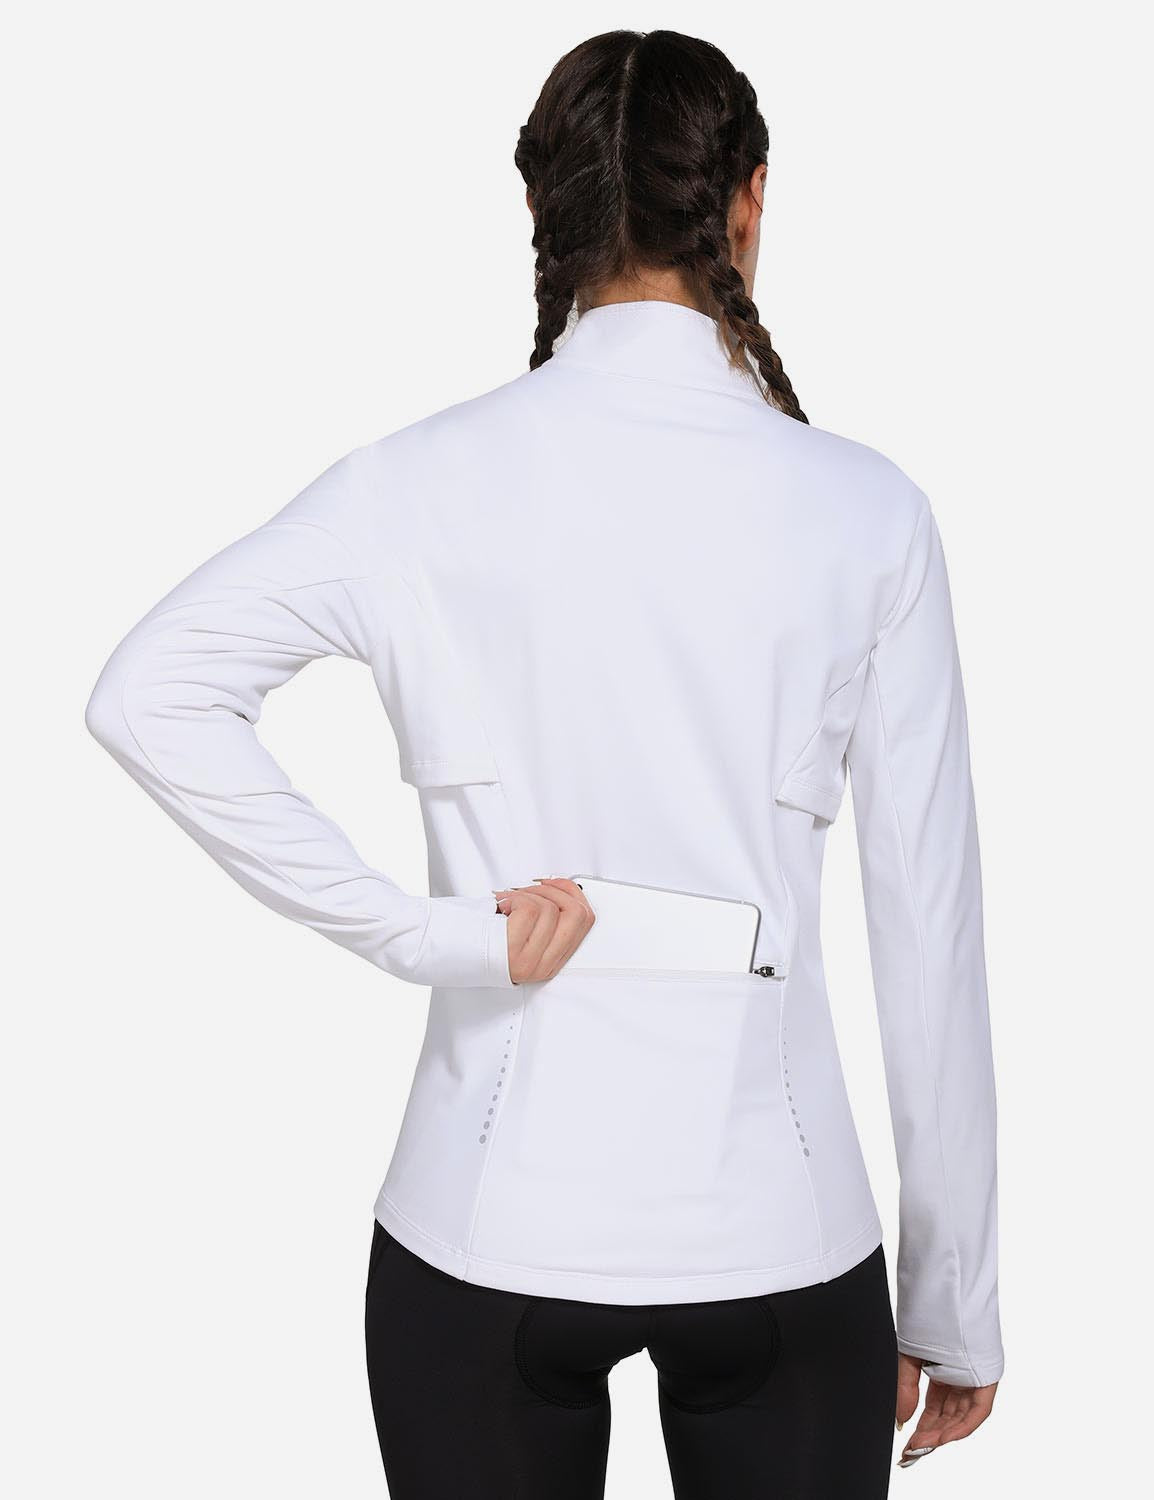 Baleaf Women's Laureate Thermal Water-Resistant Jacket cai039 Lucent White Back